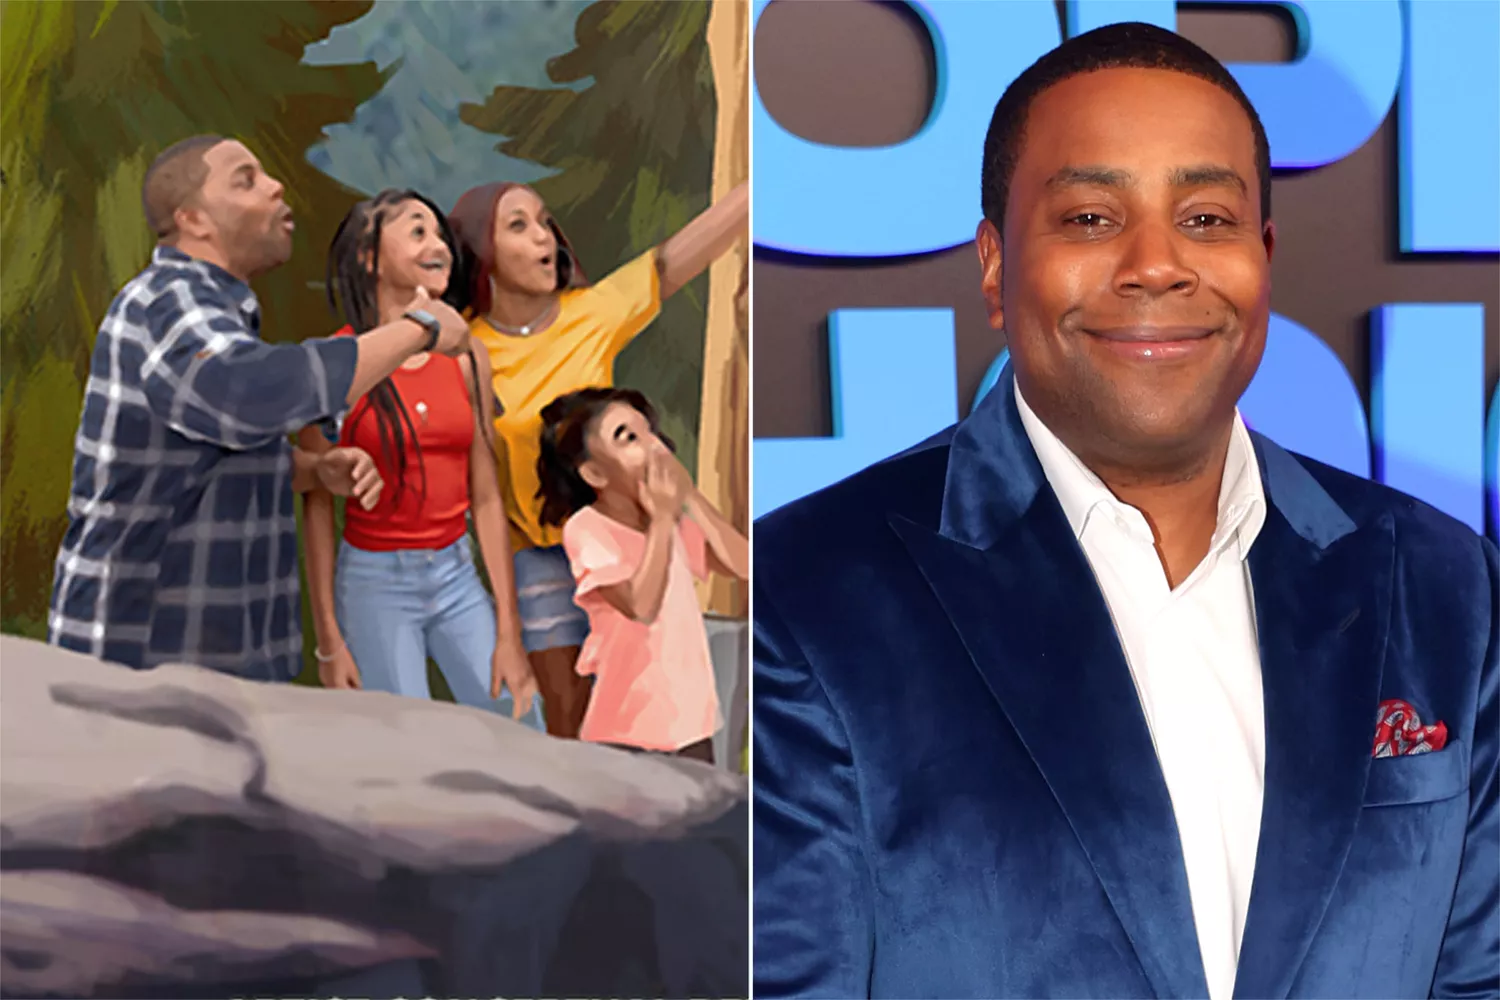 Universal Studios Orlando How to Train Your Dragon concept art, Host Kenan Thompson arrives to the 2021 People's Choice Awards held at Barker Hangar on December 7, 2021 in Santa Monica, California